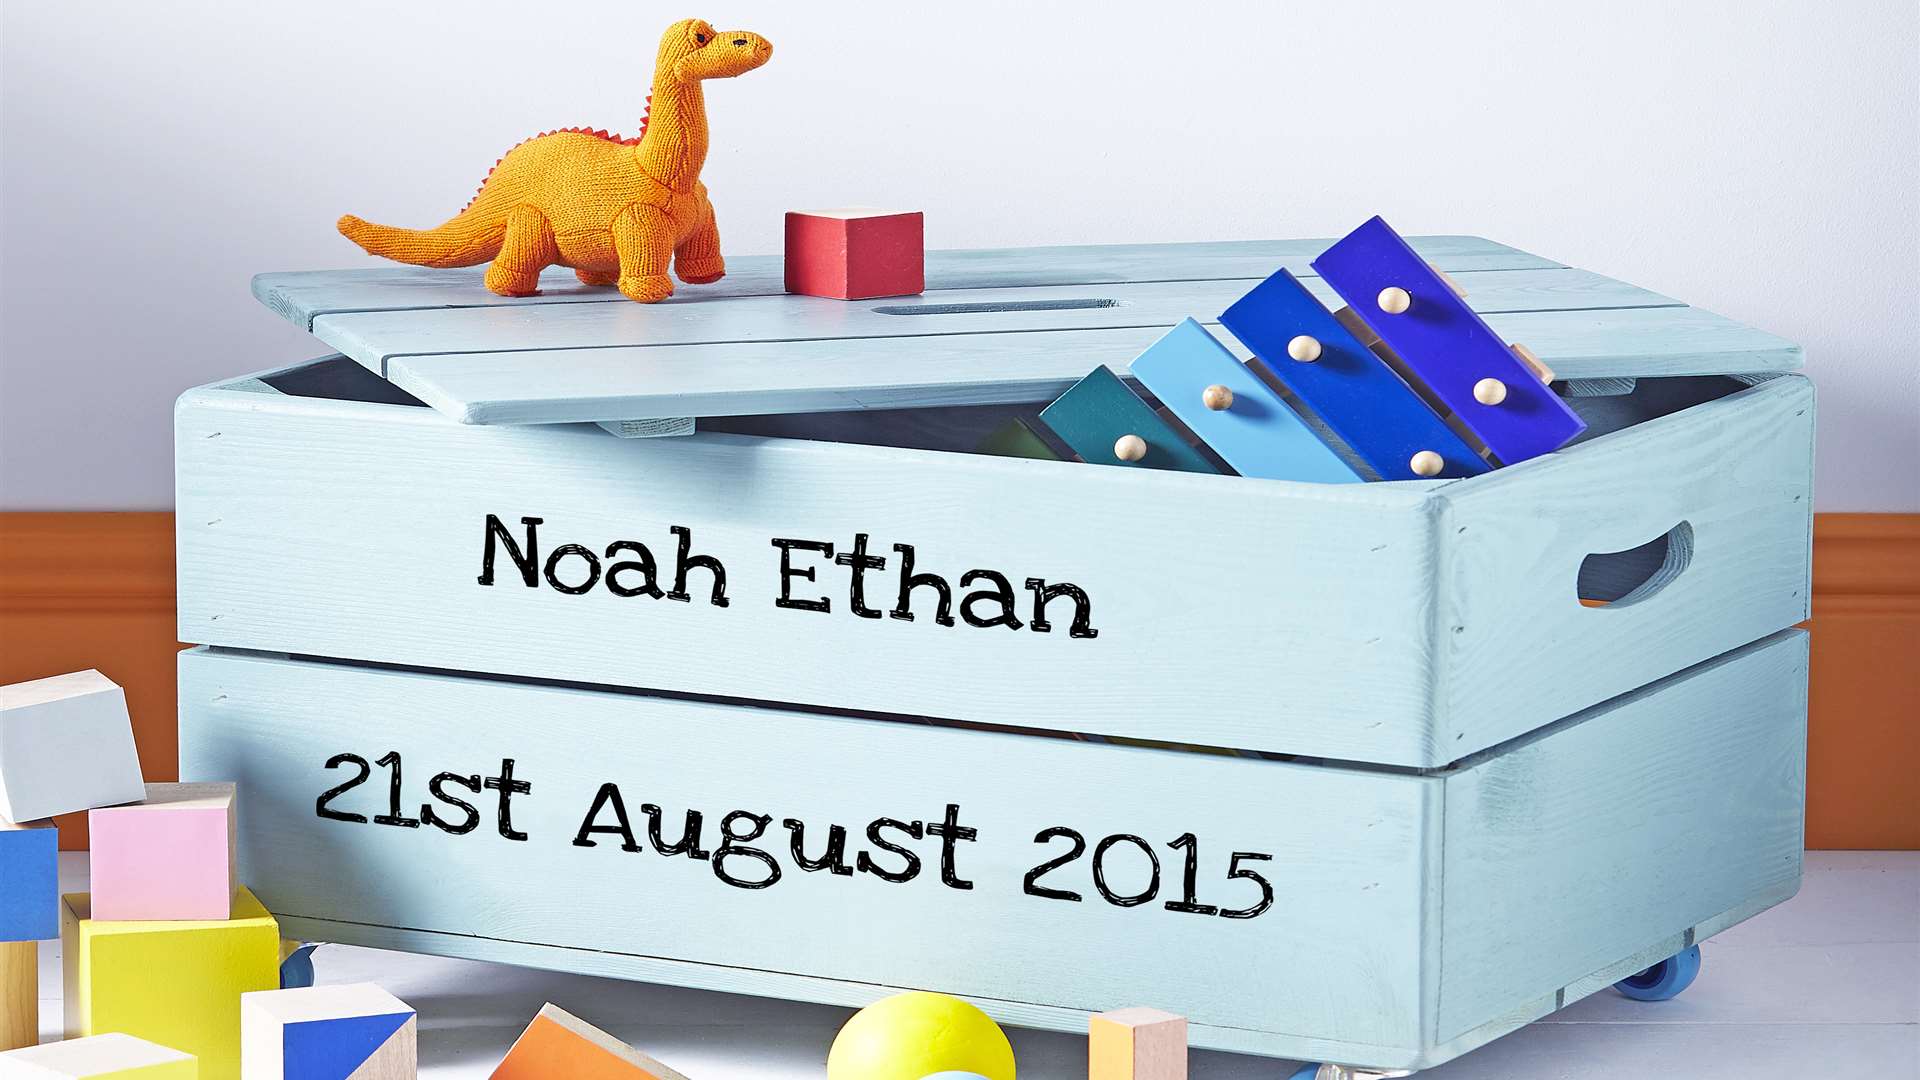 This super cool personalised toy box is £36.95 online at www.plantabox.co.uk